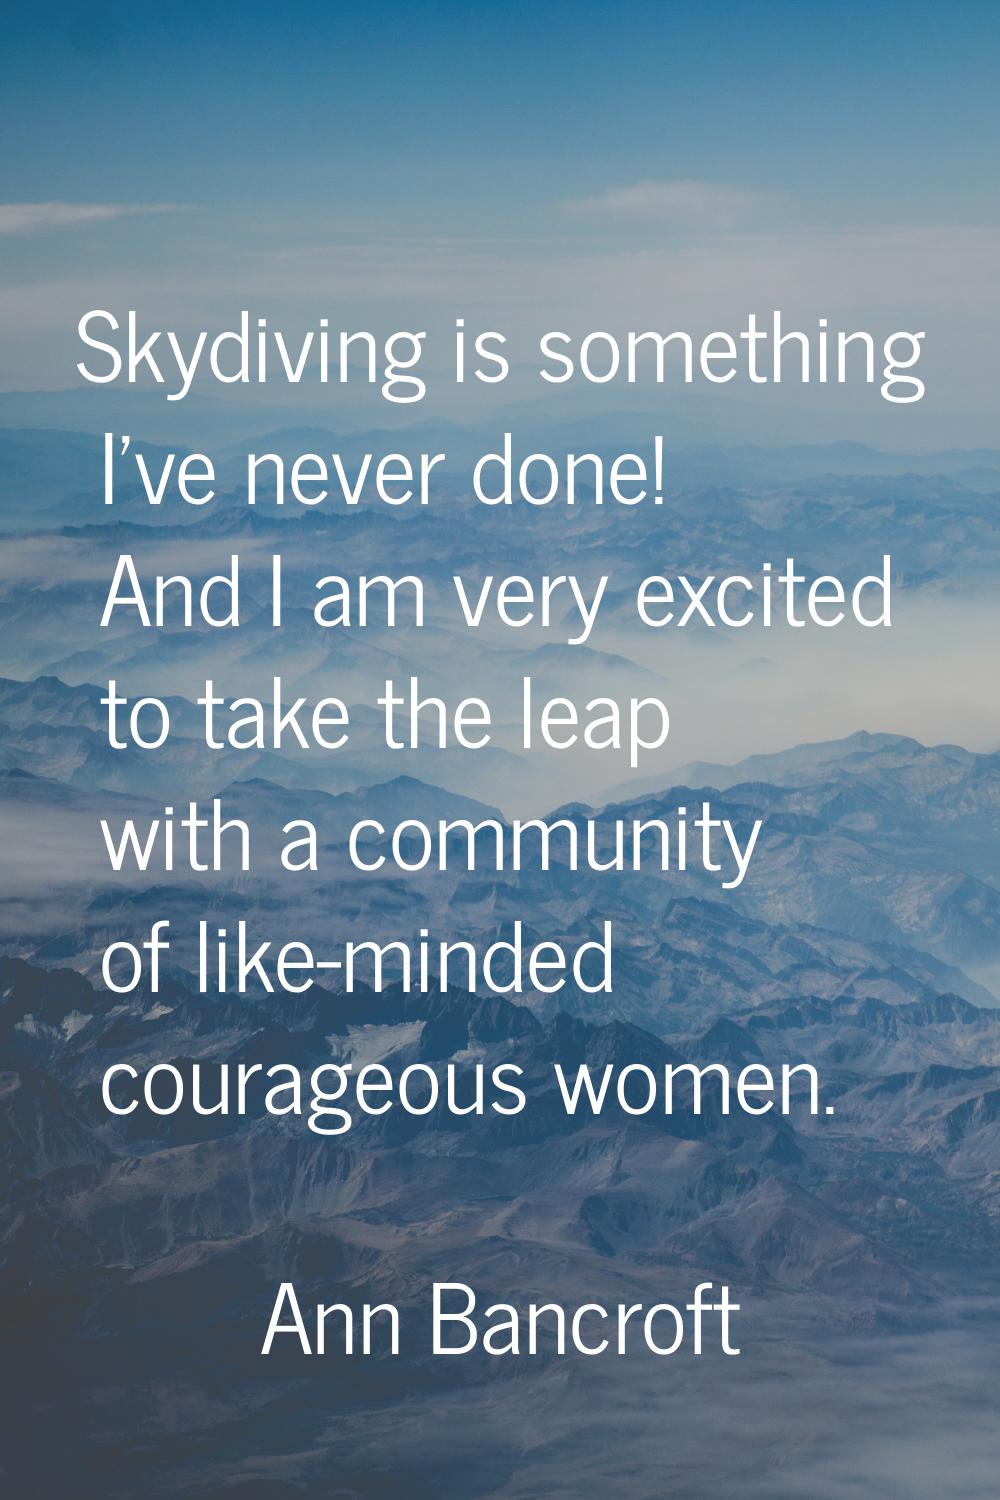 Skydiving is something I've never done! And I am very excited to take the leap with a community of 